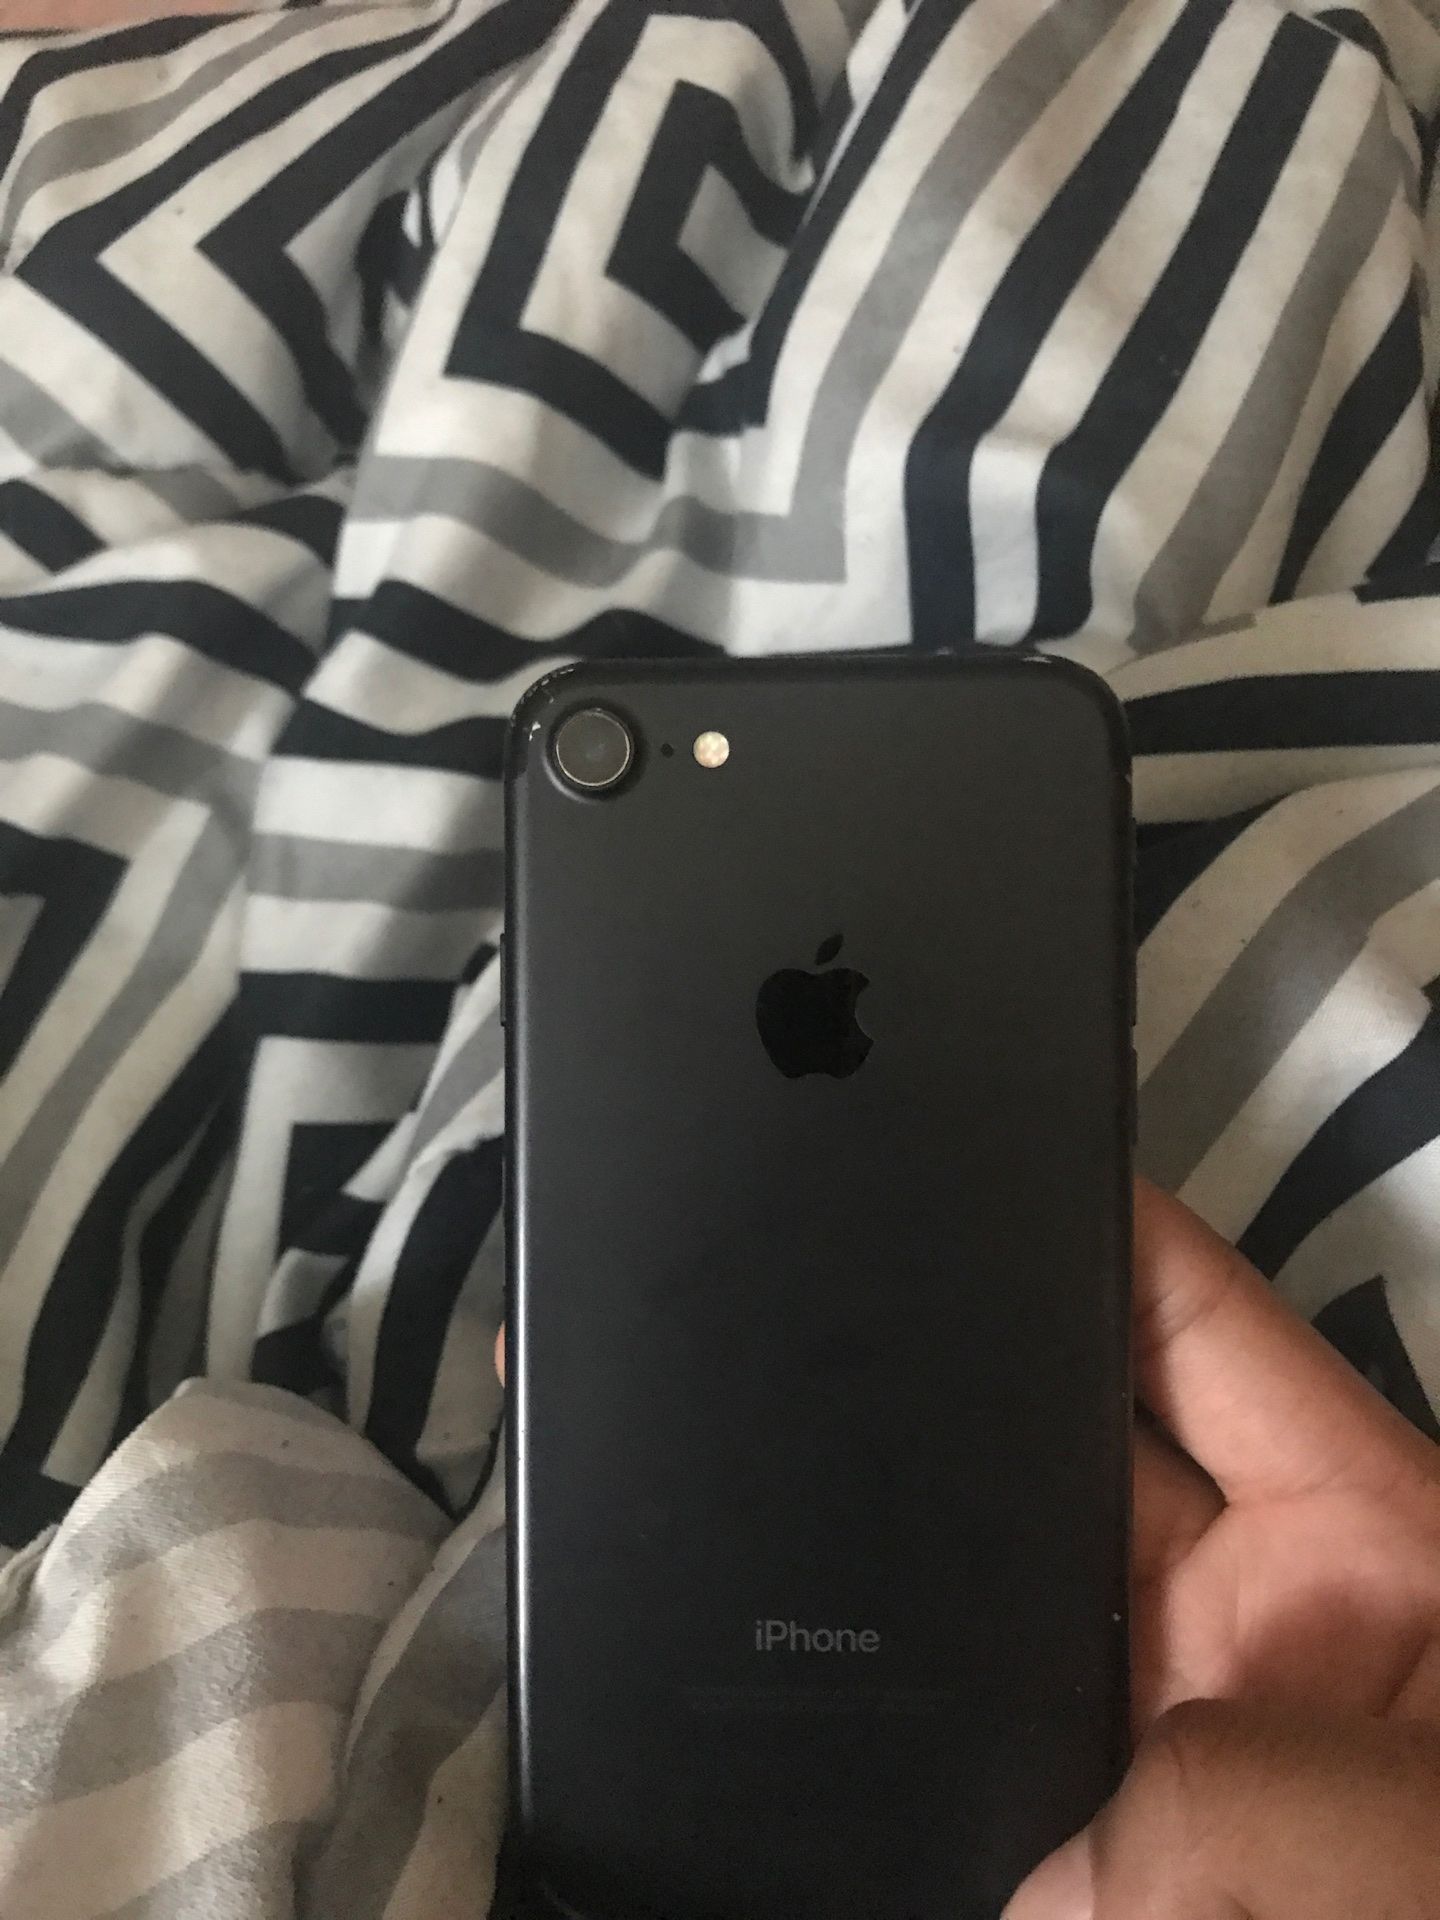 Perfectly fine iPhone 7 unlocked with any carrier